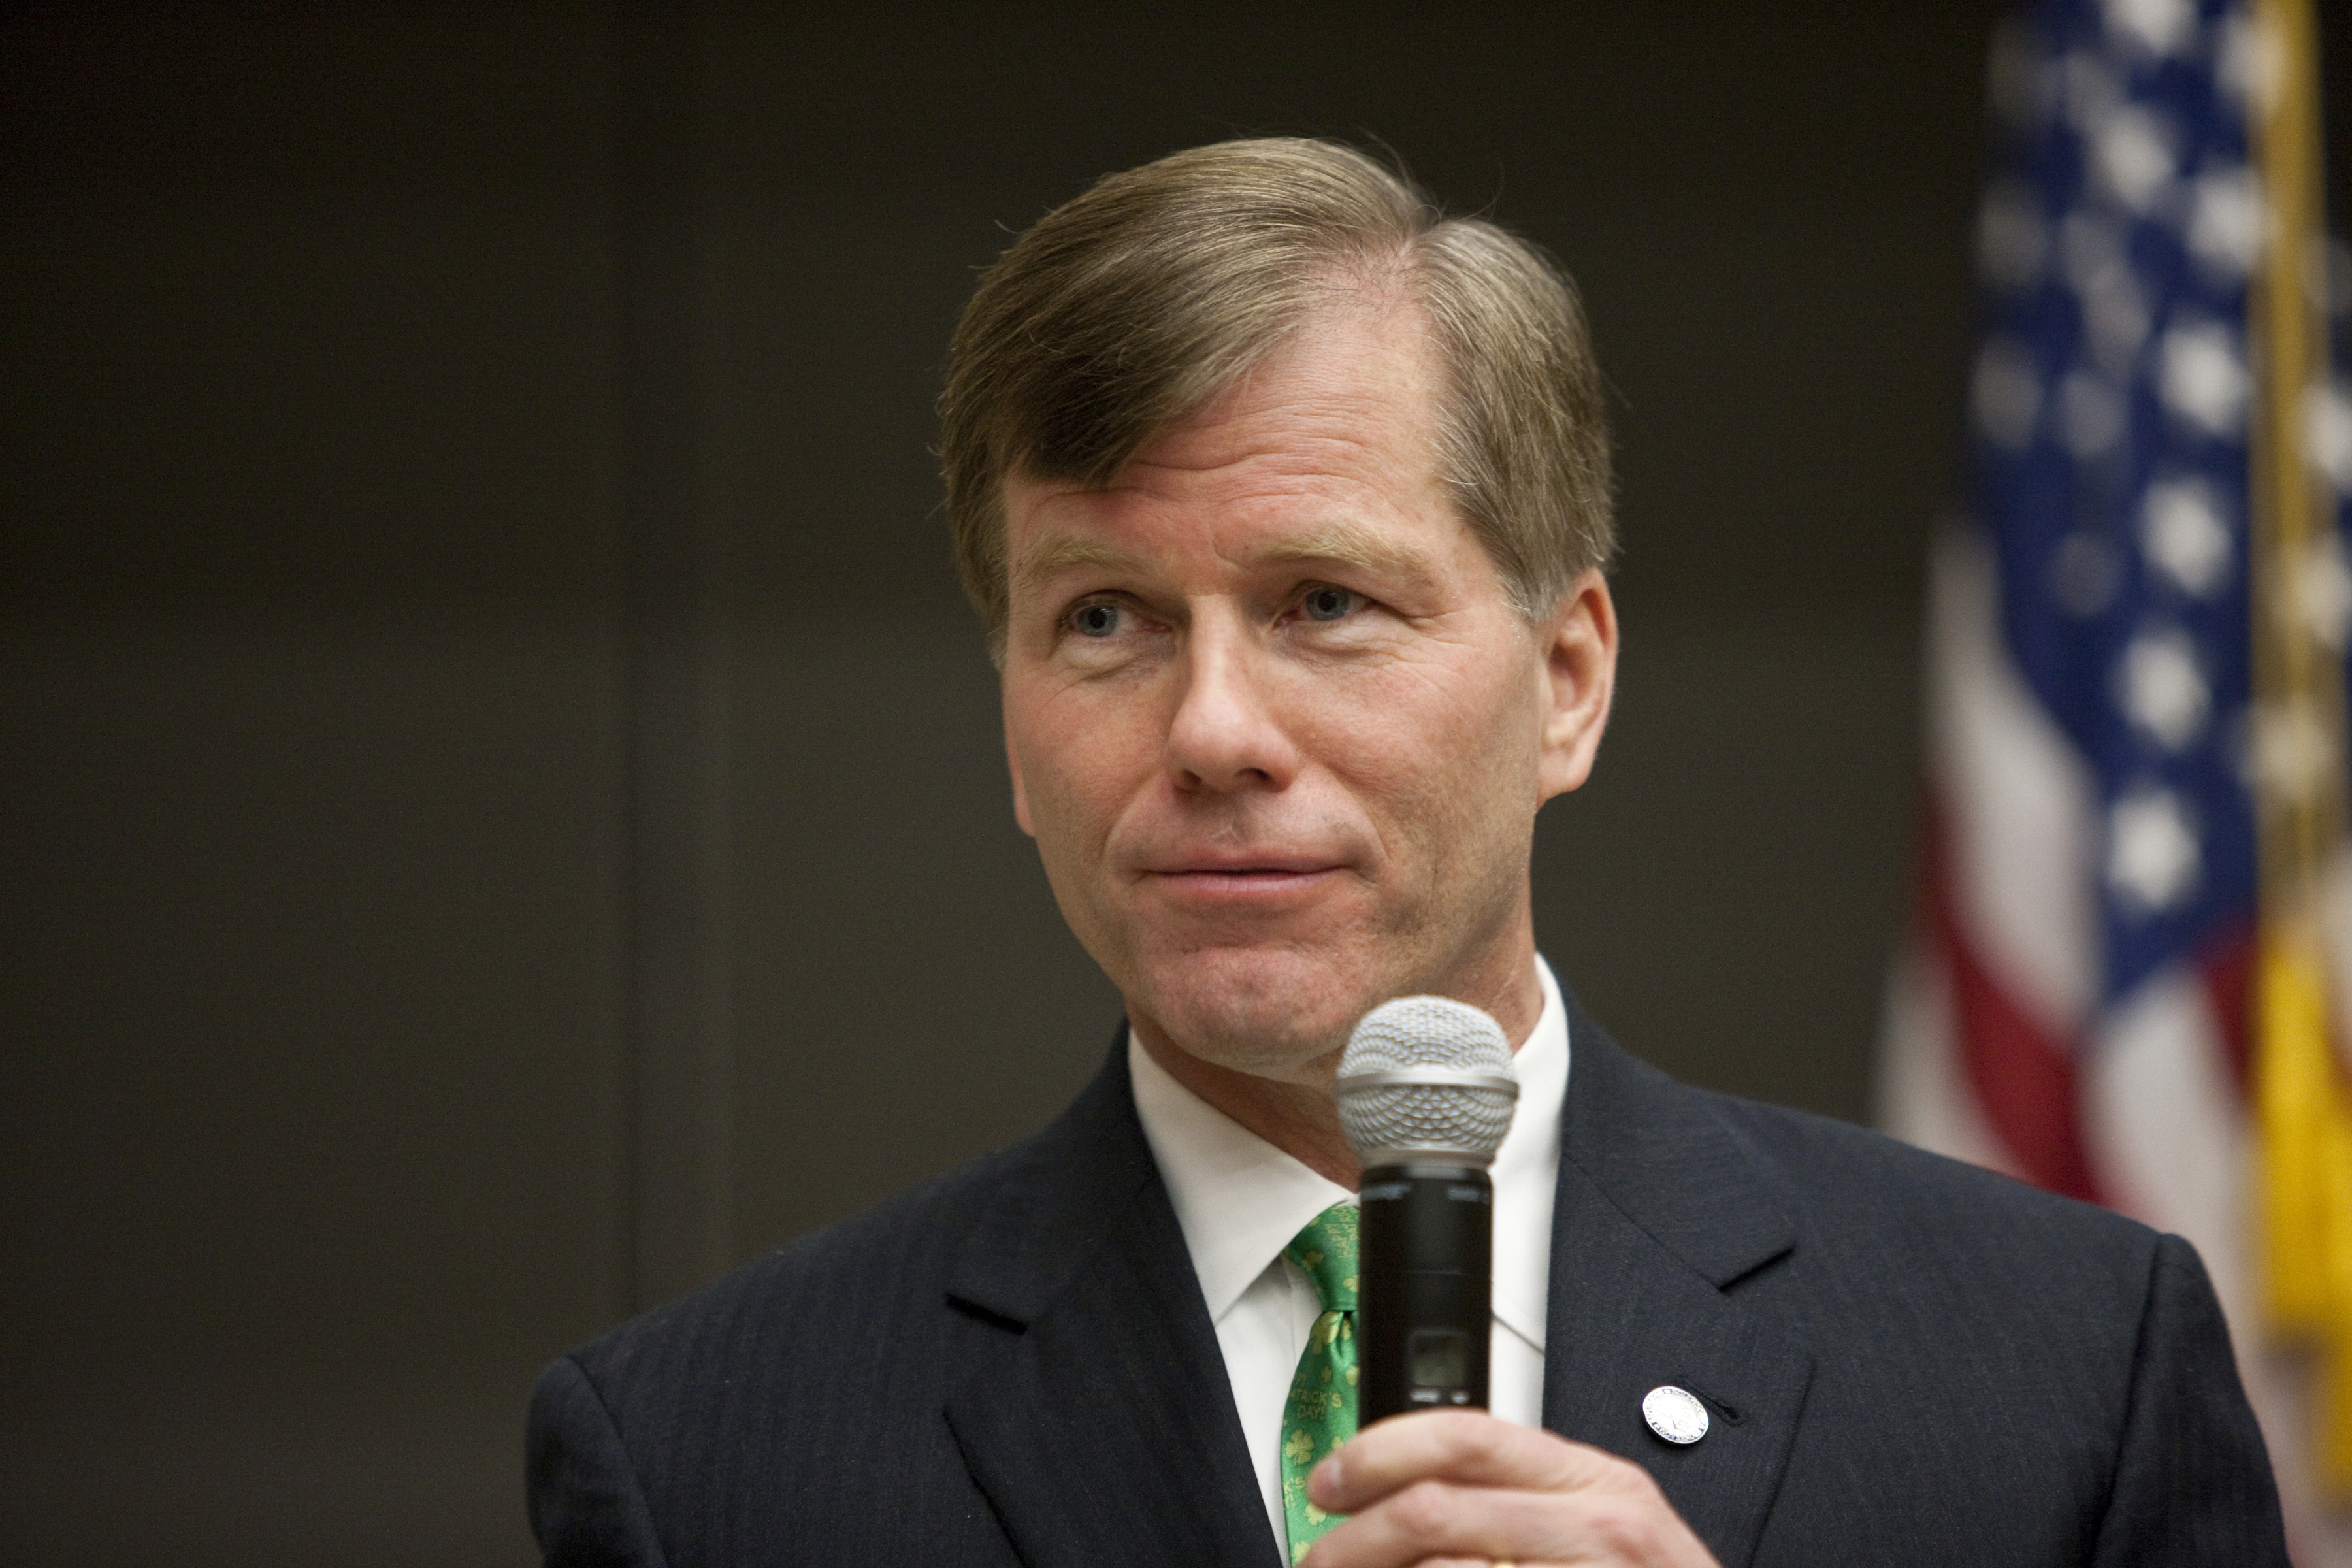 Virginia Gov. Robert F. McDonnell speaking to a crowd holding a microphone